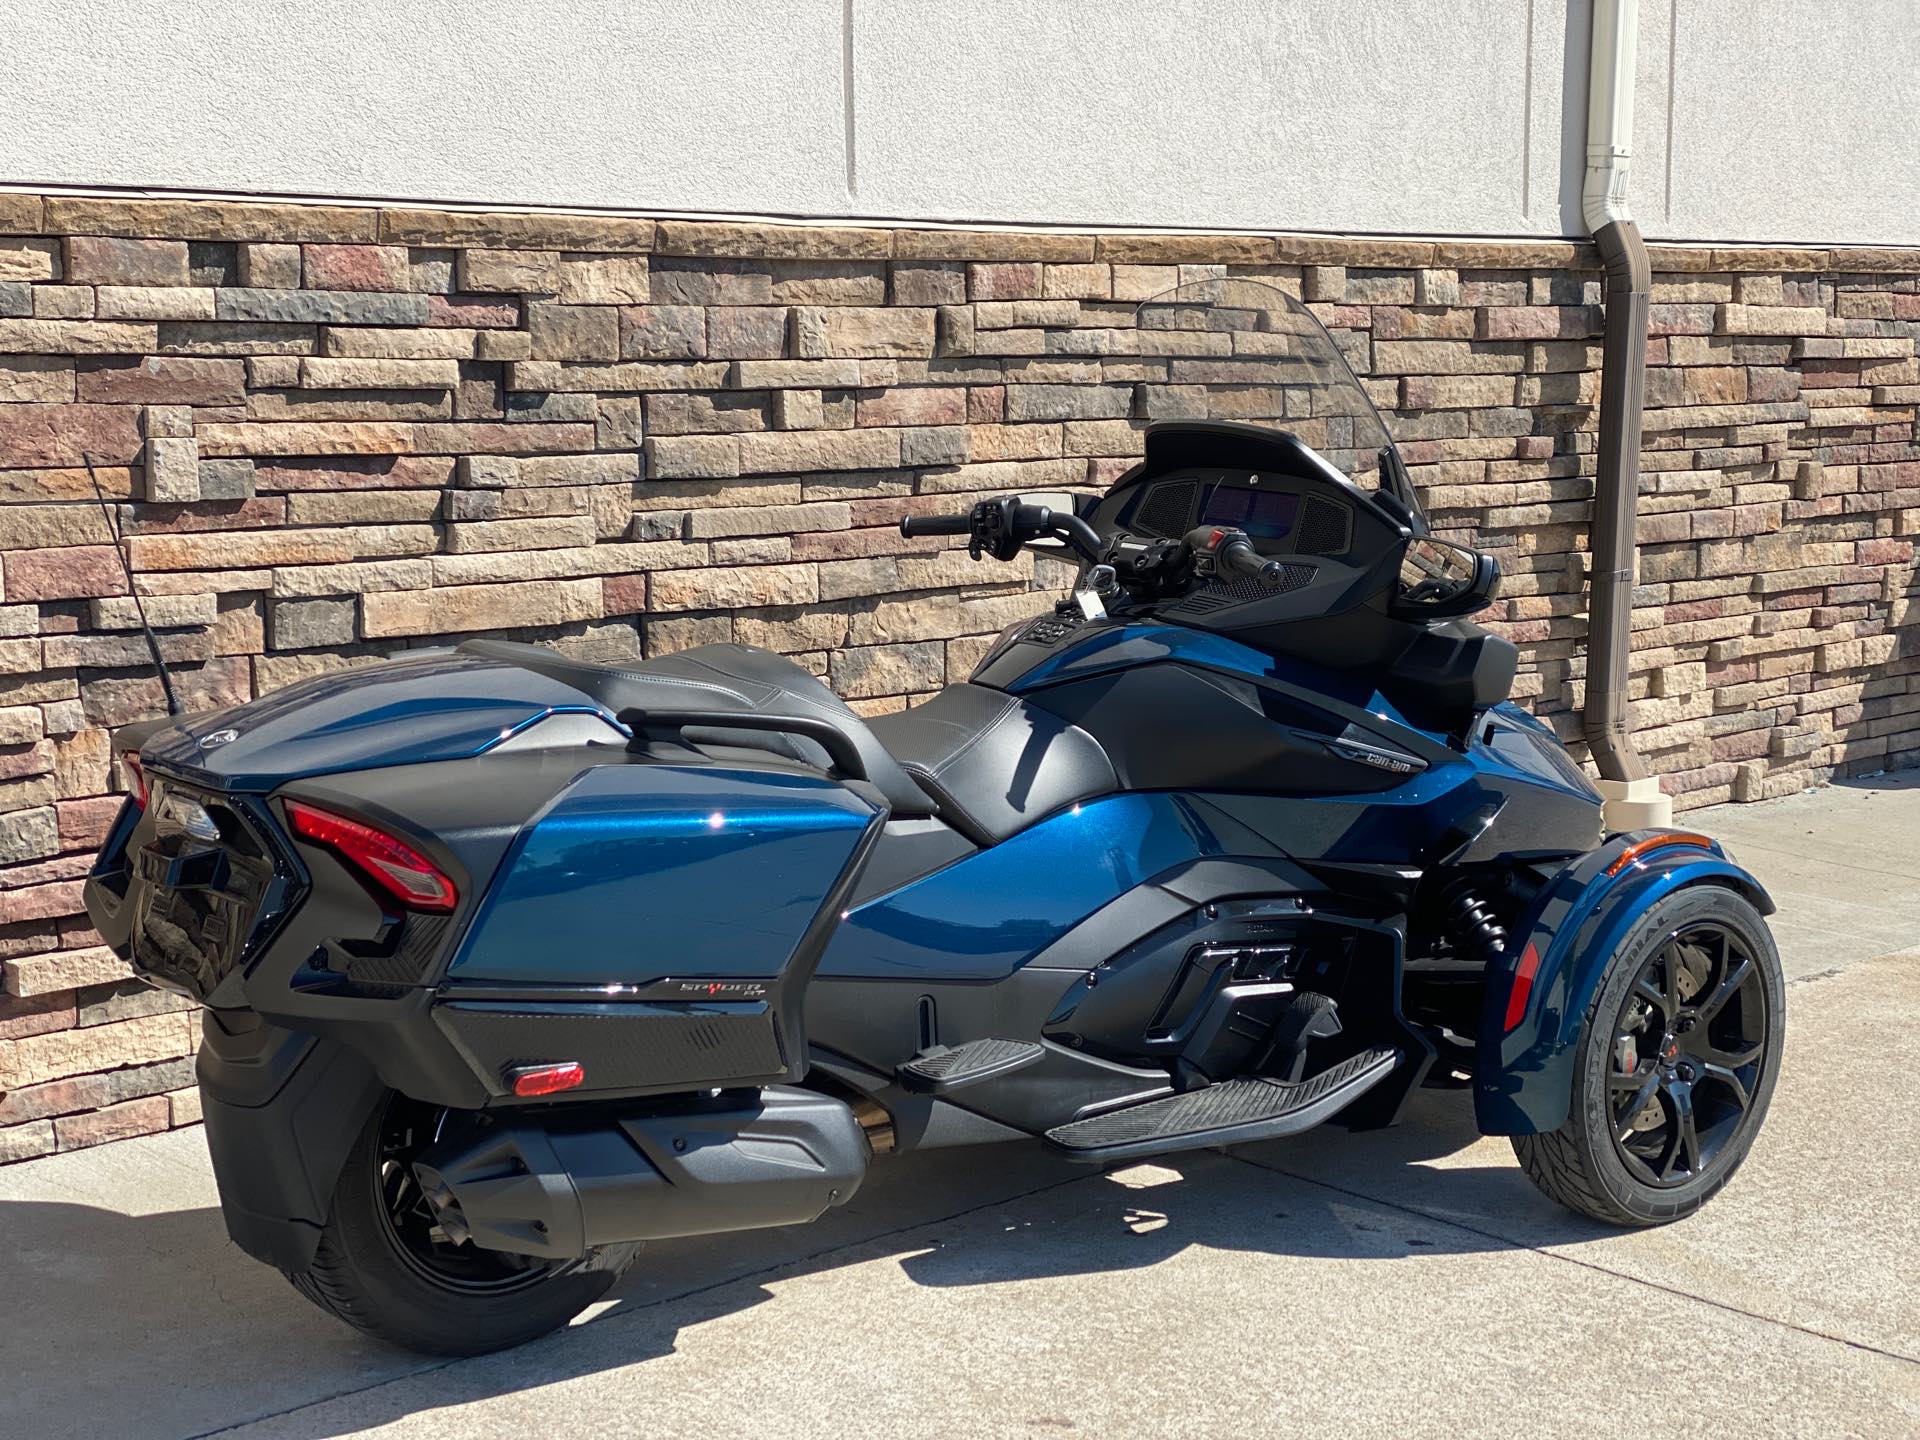 2020 Can-Am B2LB at Head Indian Motorcycle